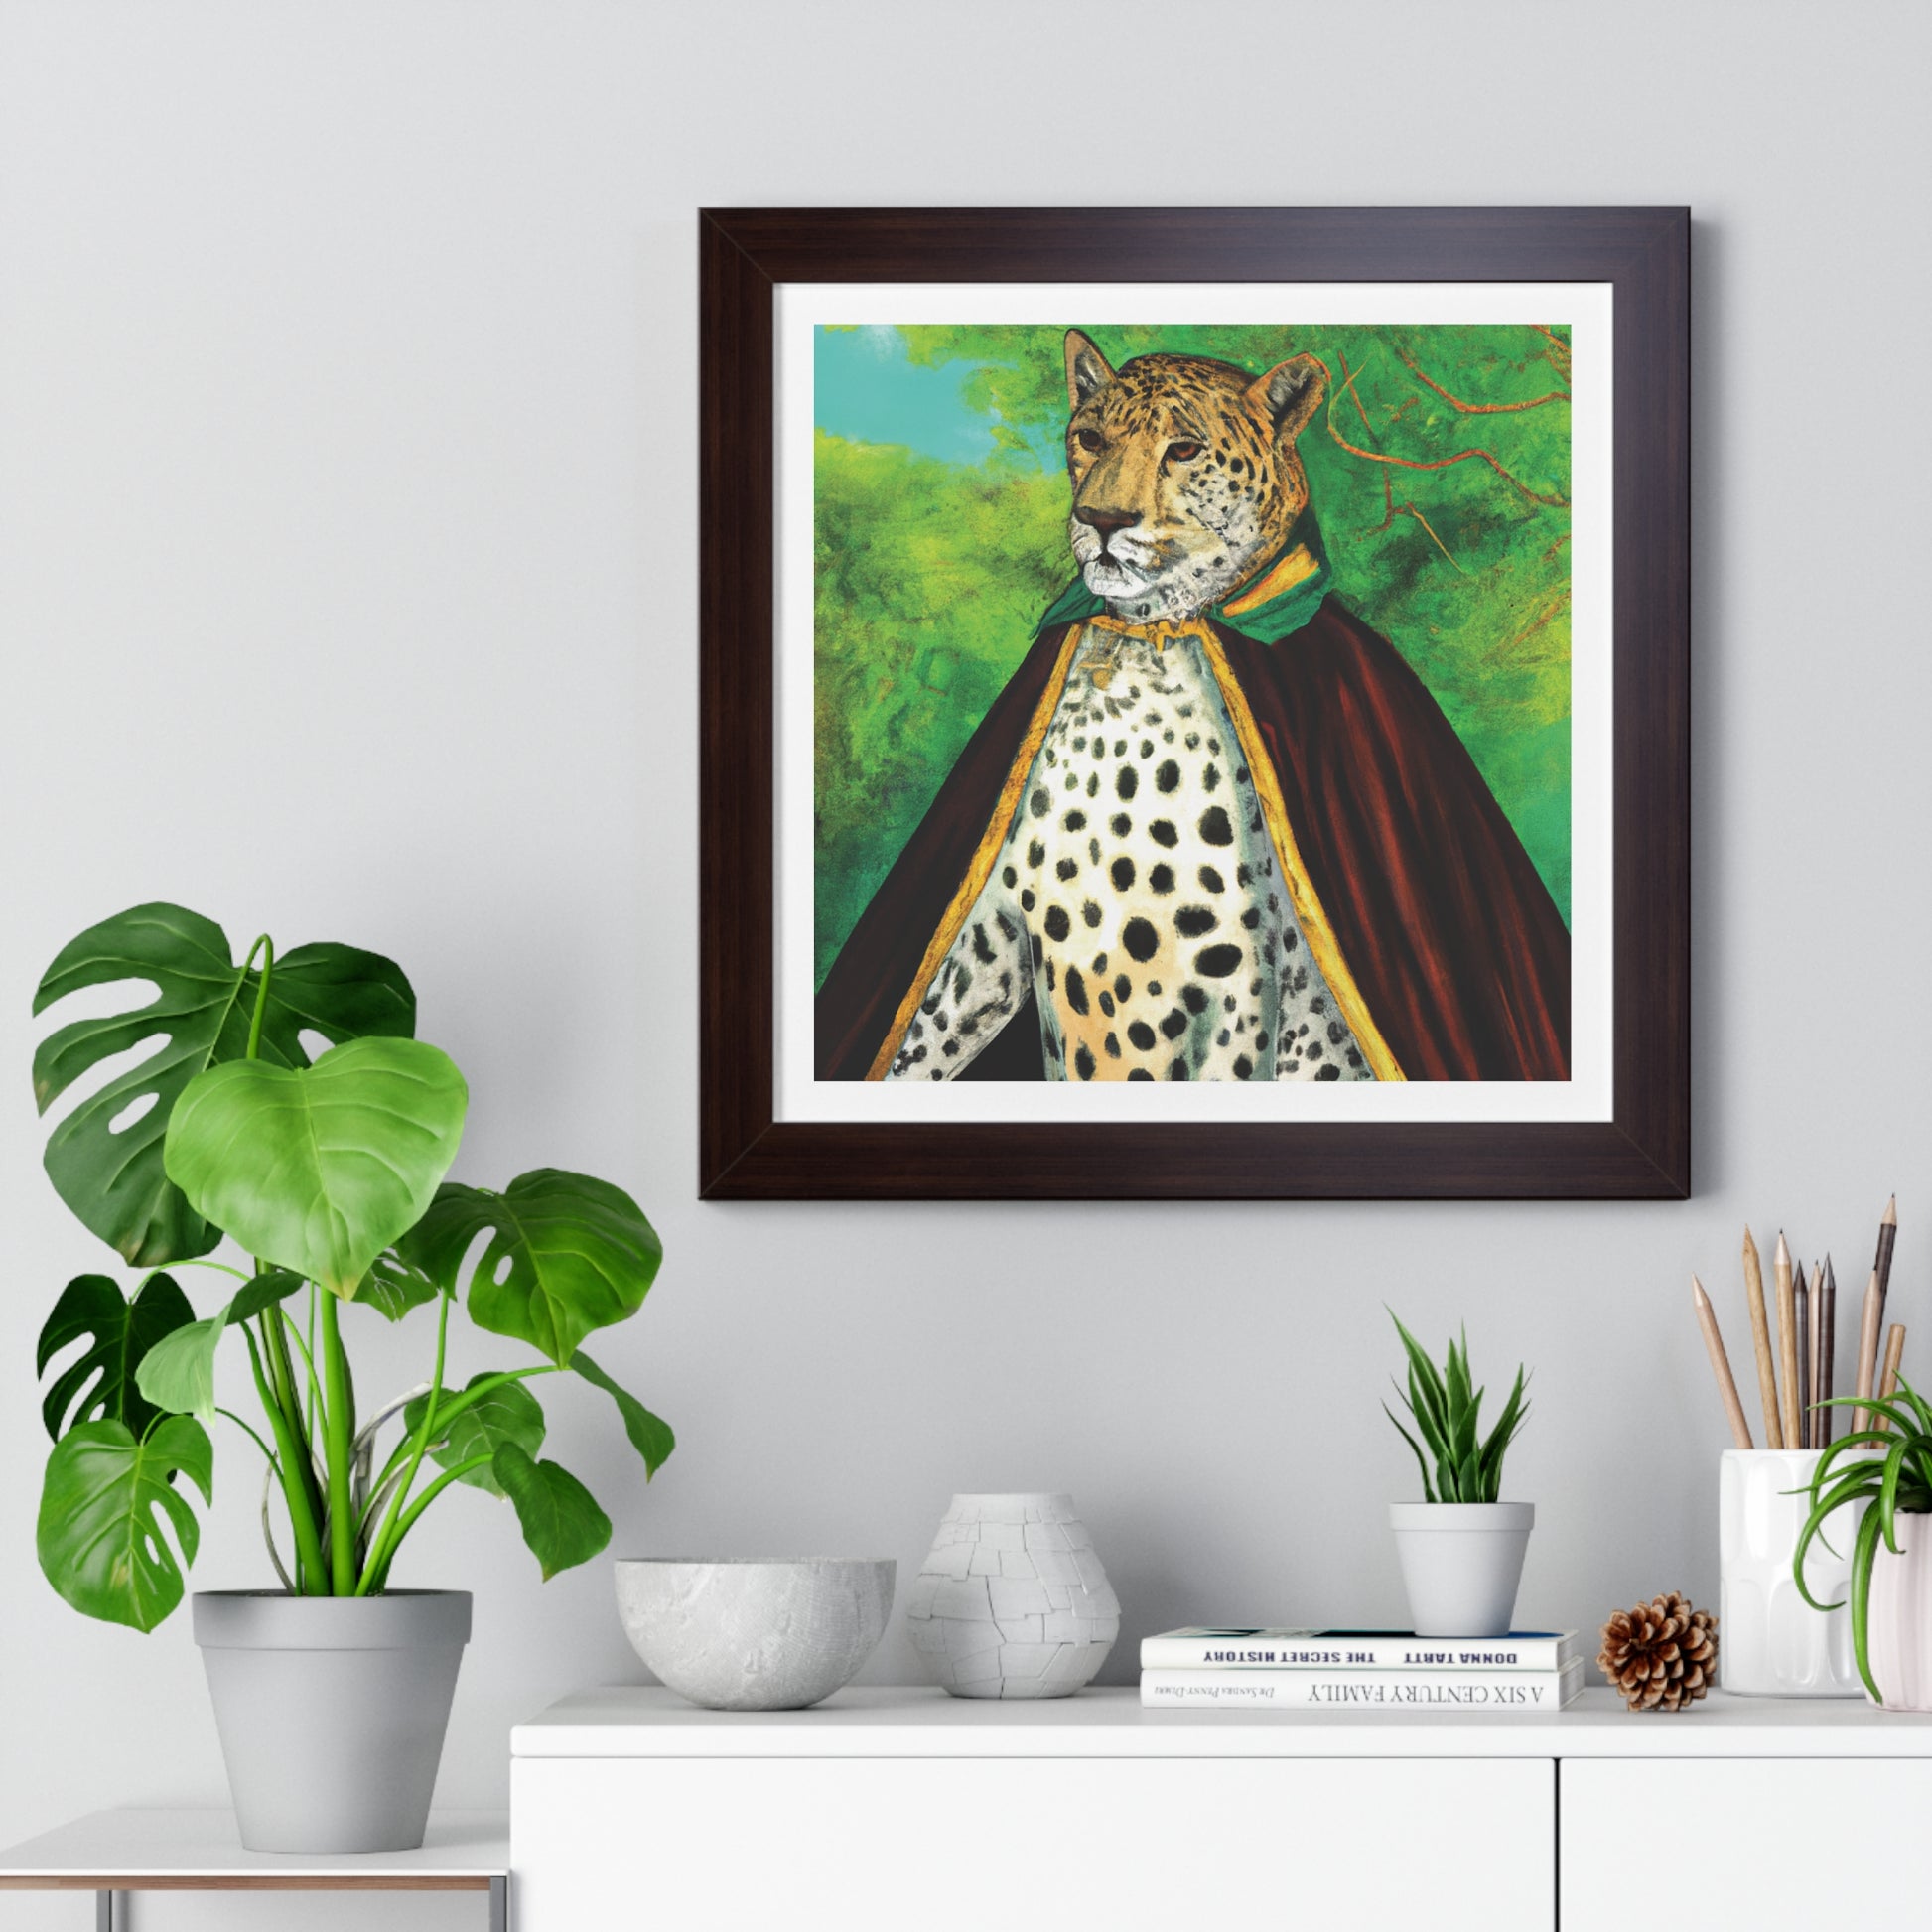 Royal Leopard in Red Robe Framed Poster Wall Art" is the title of a piece of artwork, likely depicting a majestic leopard adorned in a red robe, presented as a framed poster suitable for hanging on a wall. This description suggests an elegant and visually striking piece of décor featuring an artistic representation of a regal leopard